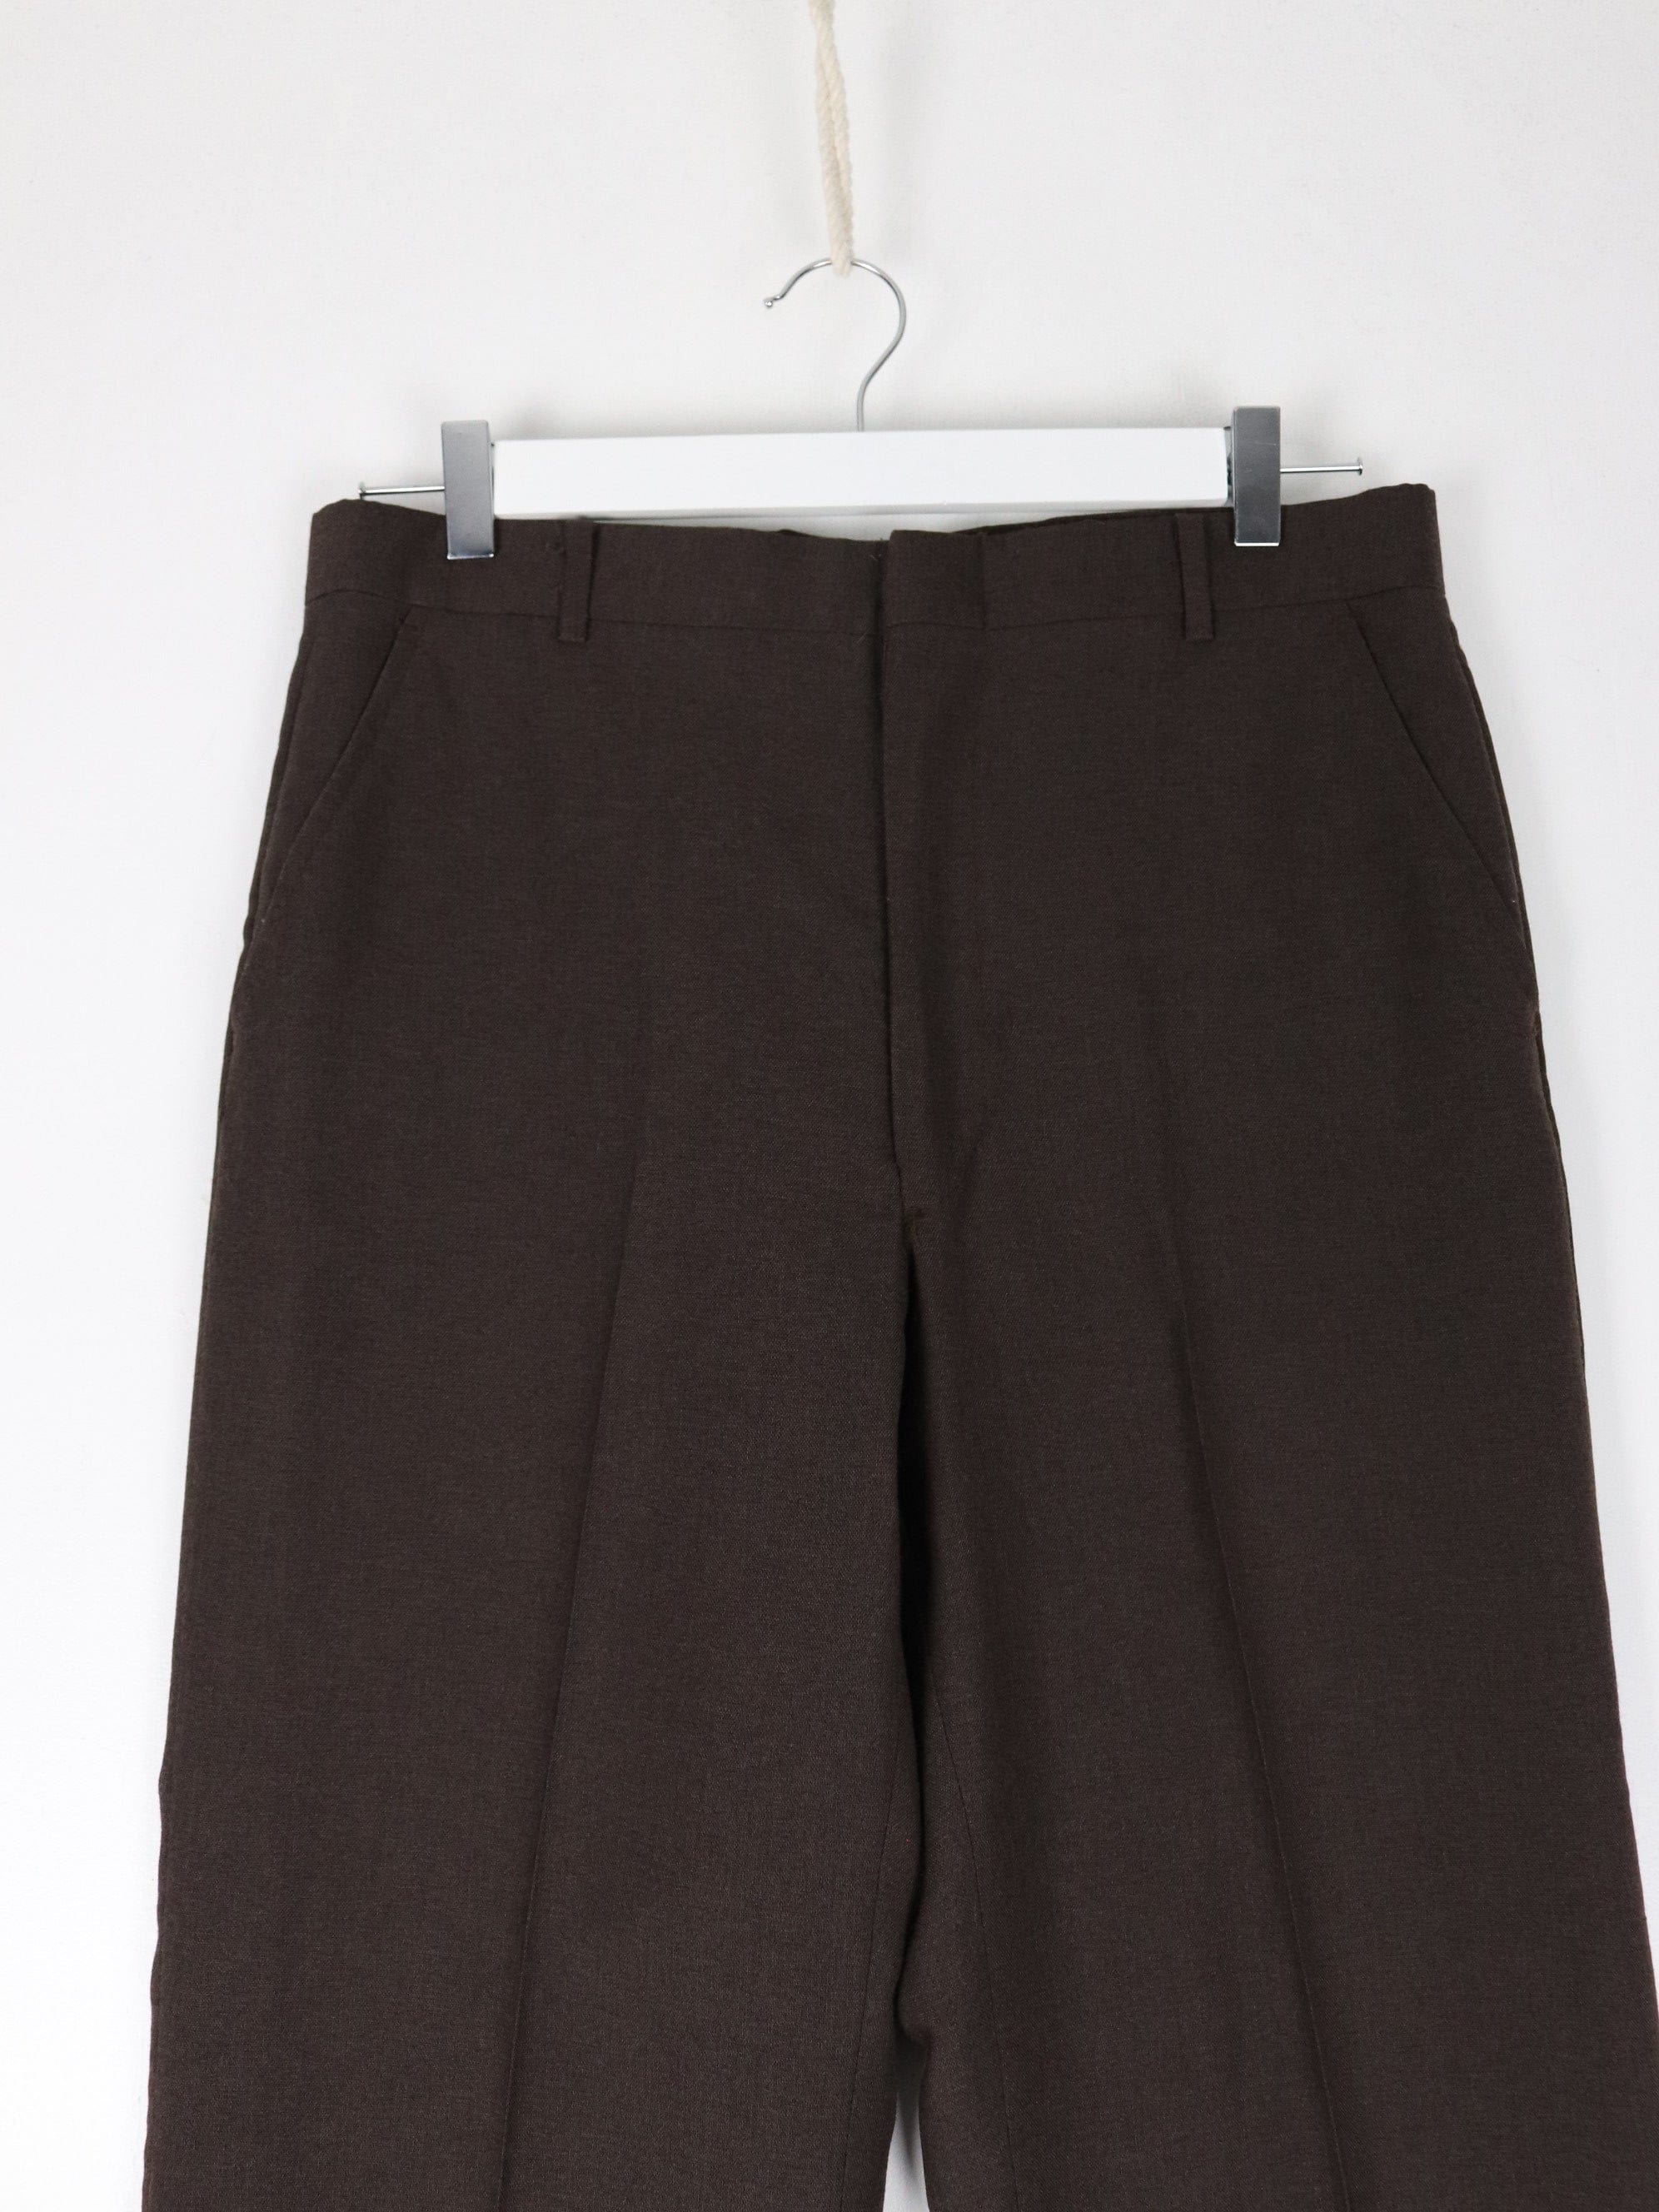 Vintage Towncraft Pants Mens 32 x 30 Brown Pleated 80s Dress